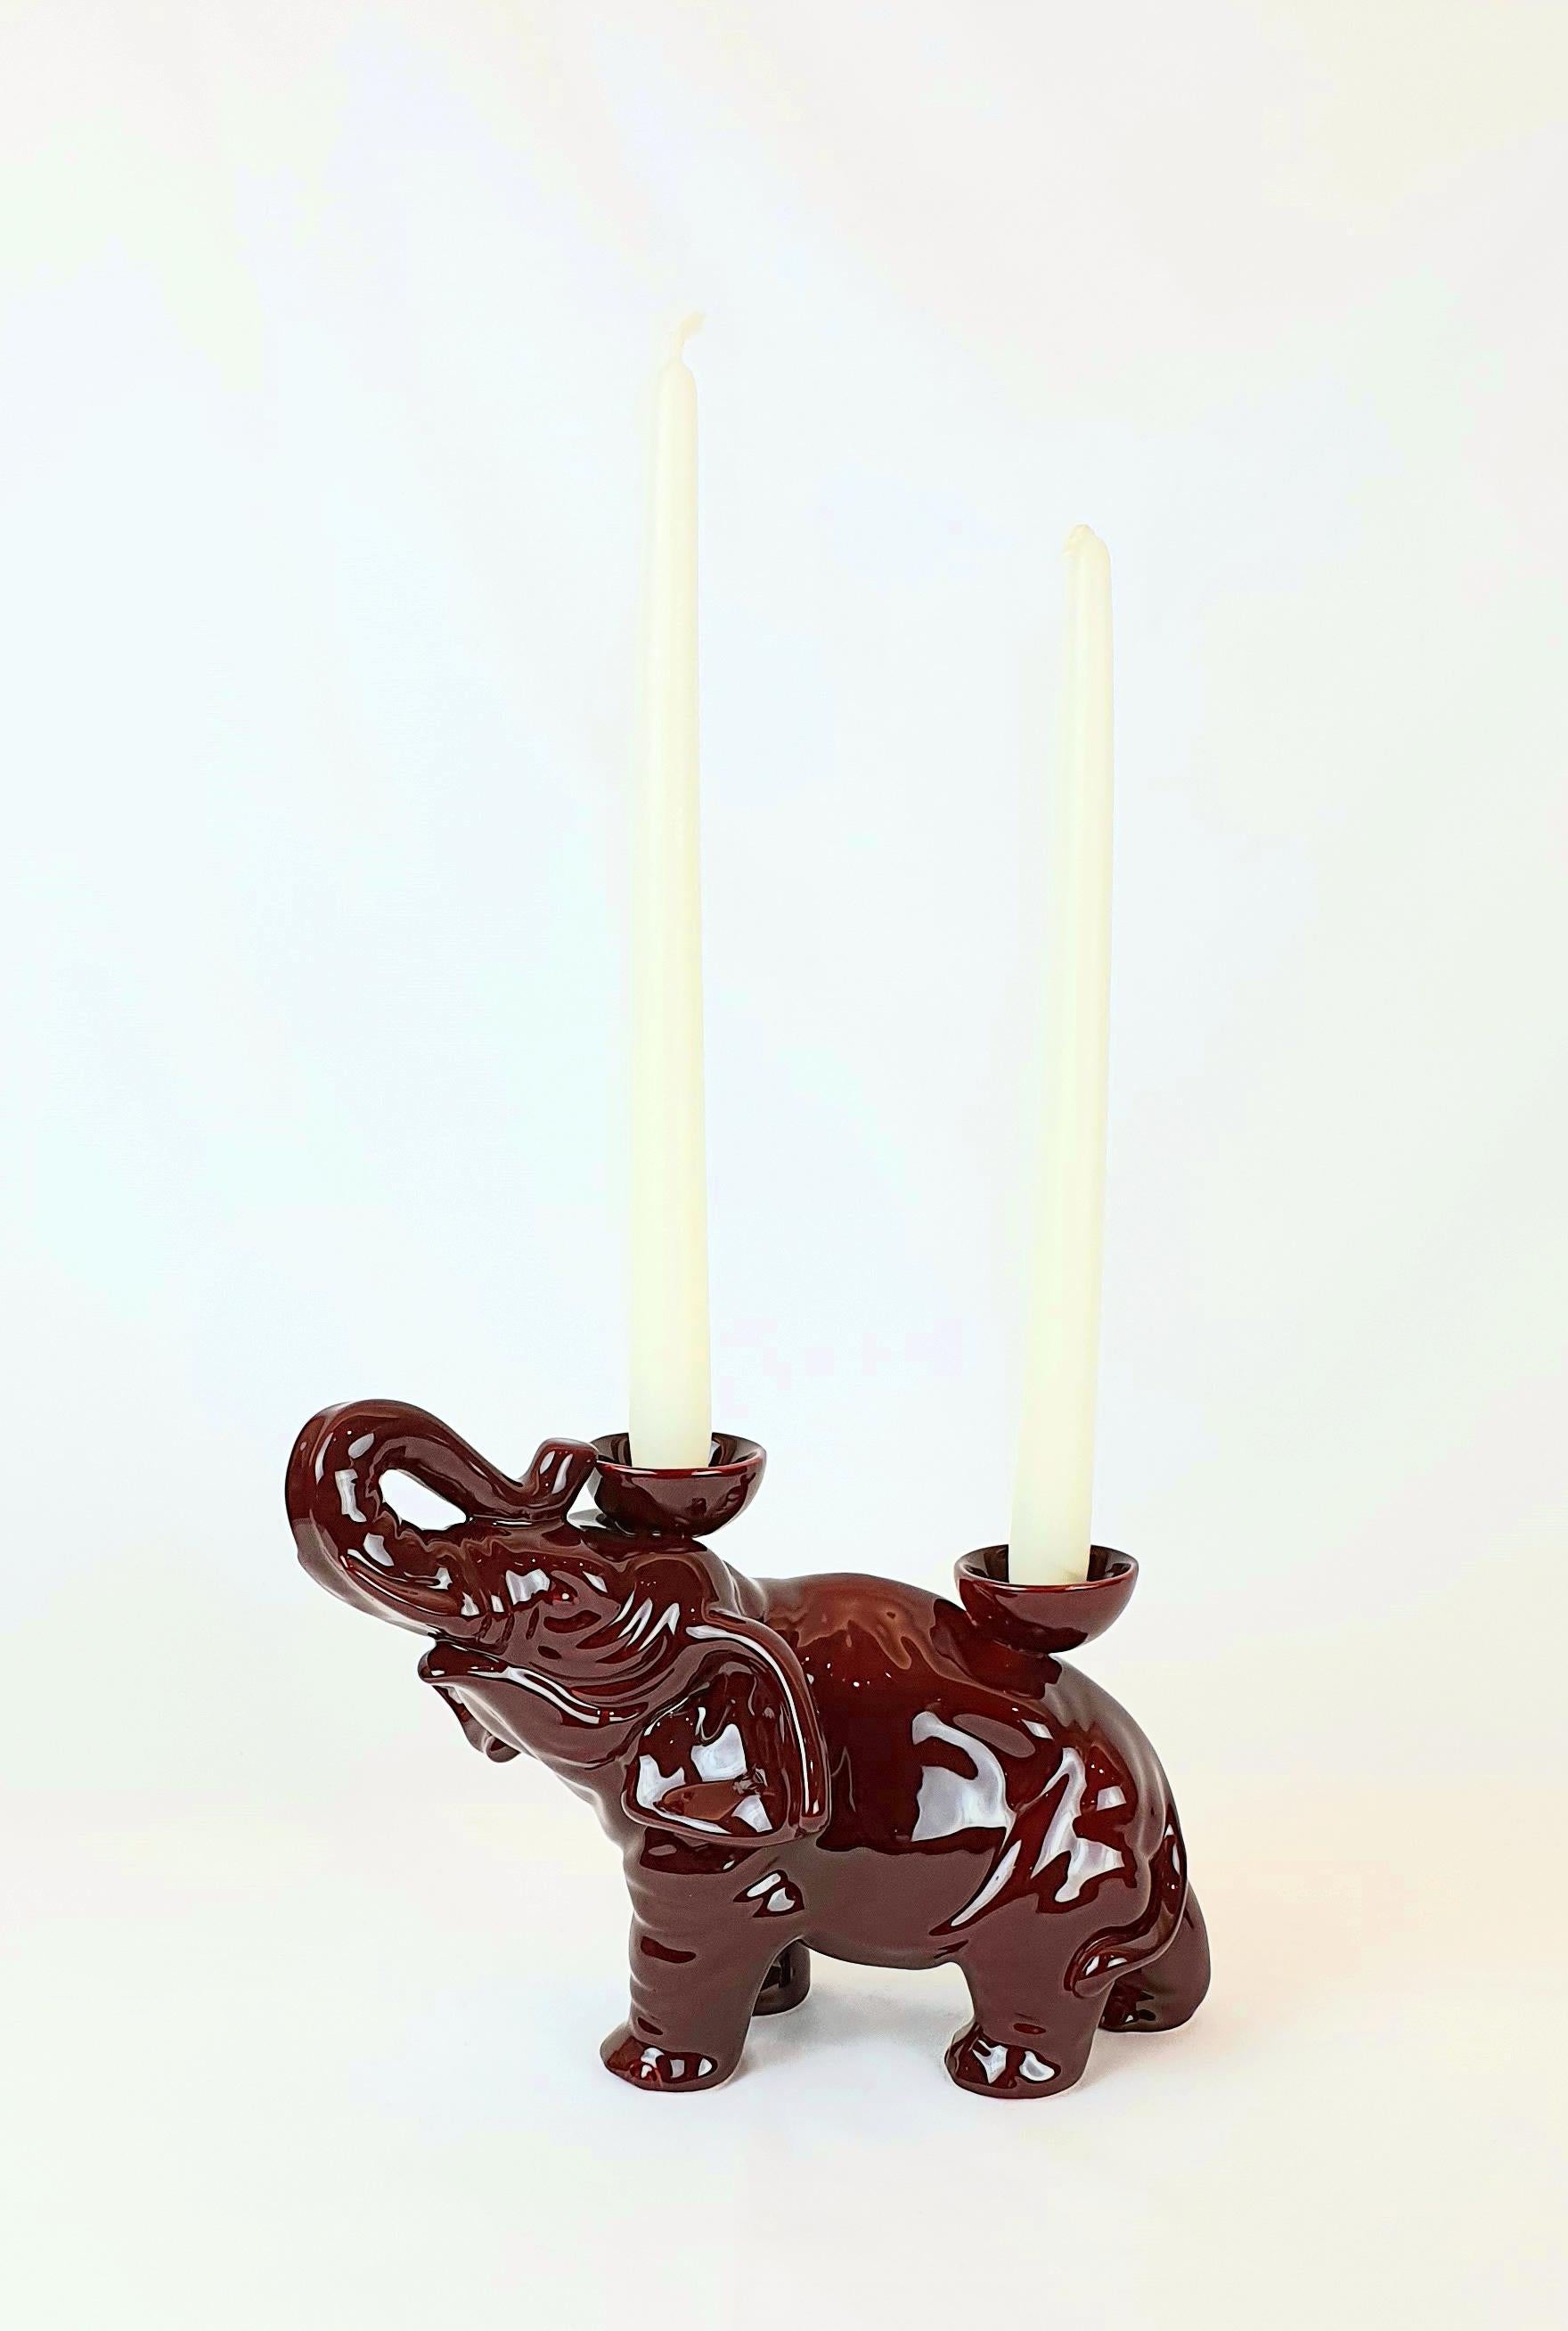 This elephant is part of an original collection of candle holder animals. The realization of the shape takes place through a mold with liquid clay; tiled and hand painted in a vast range of colours, from the most delicate pastels to the more